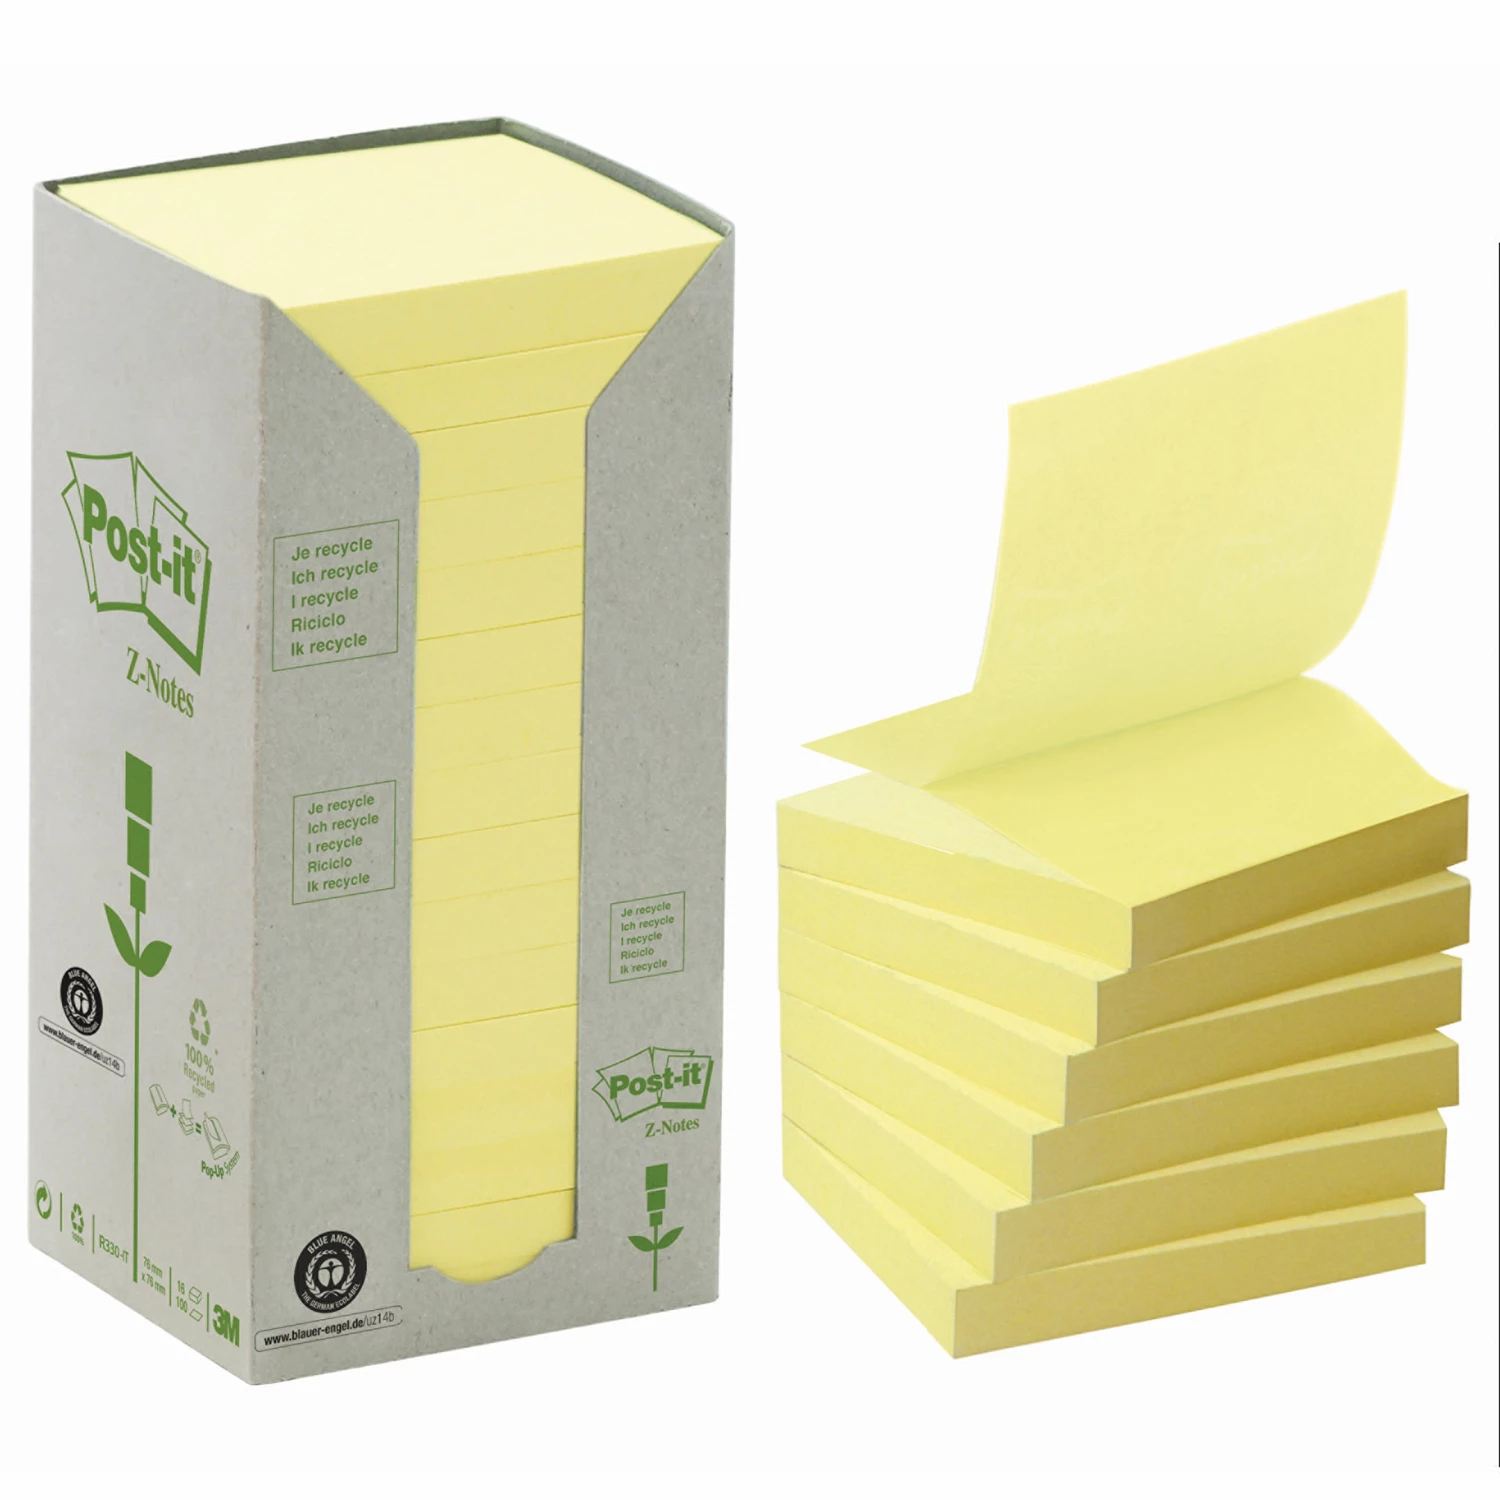 Post-it Recycled Z-block gul 16/fp